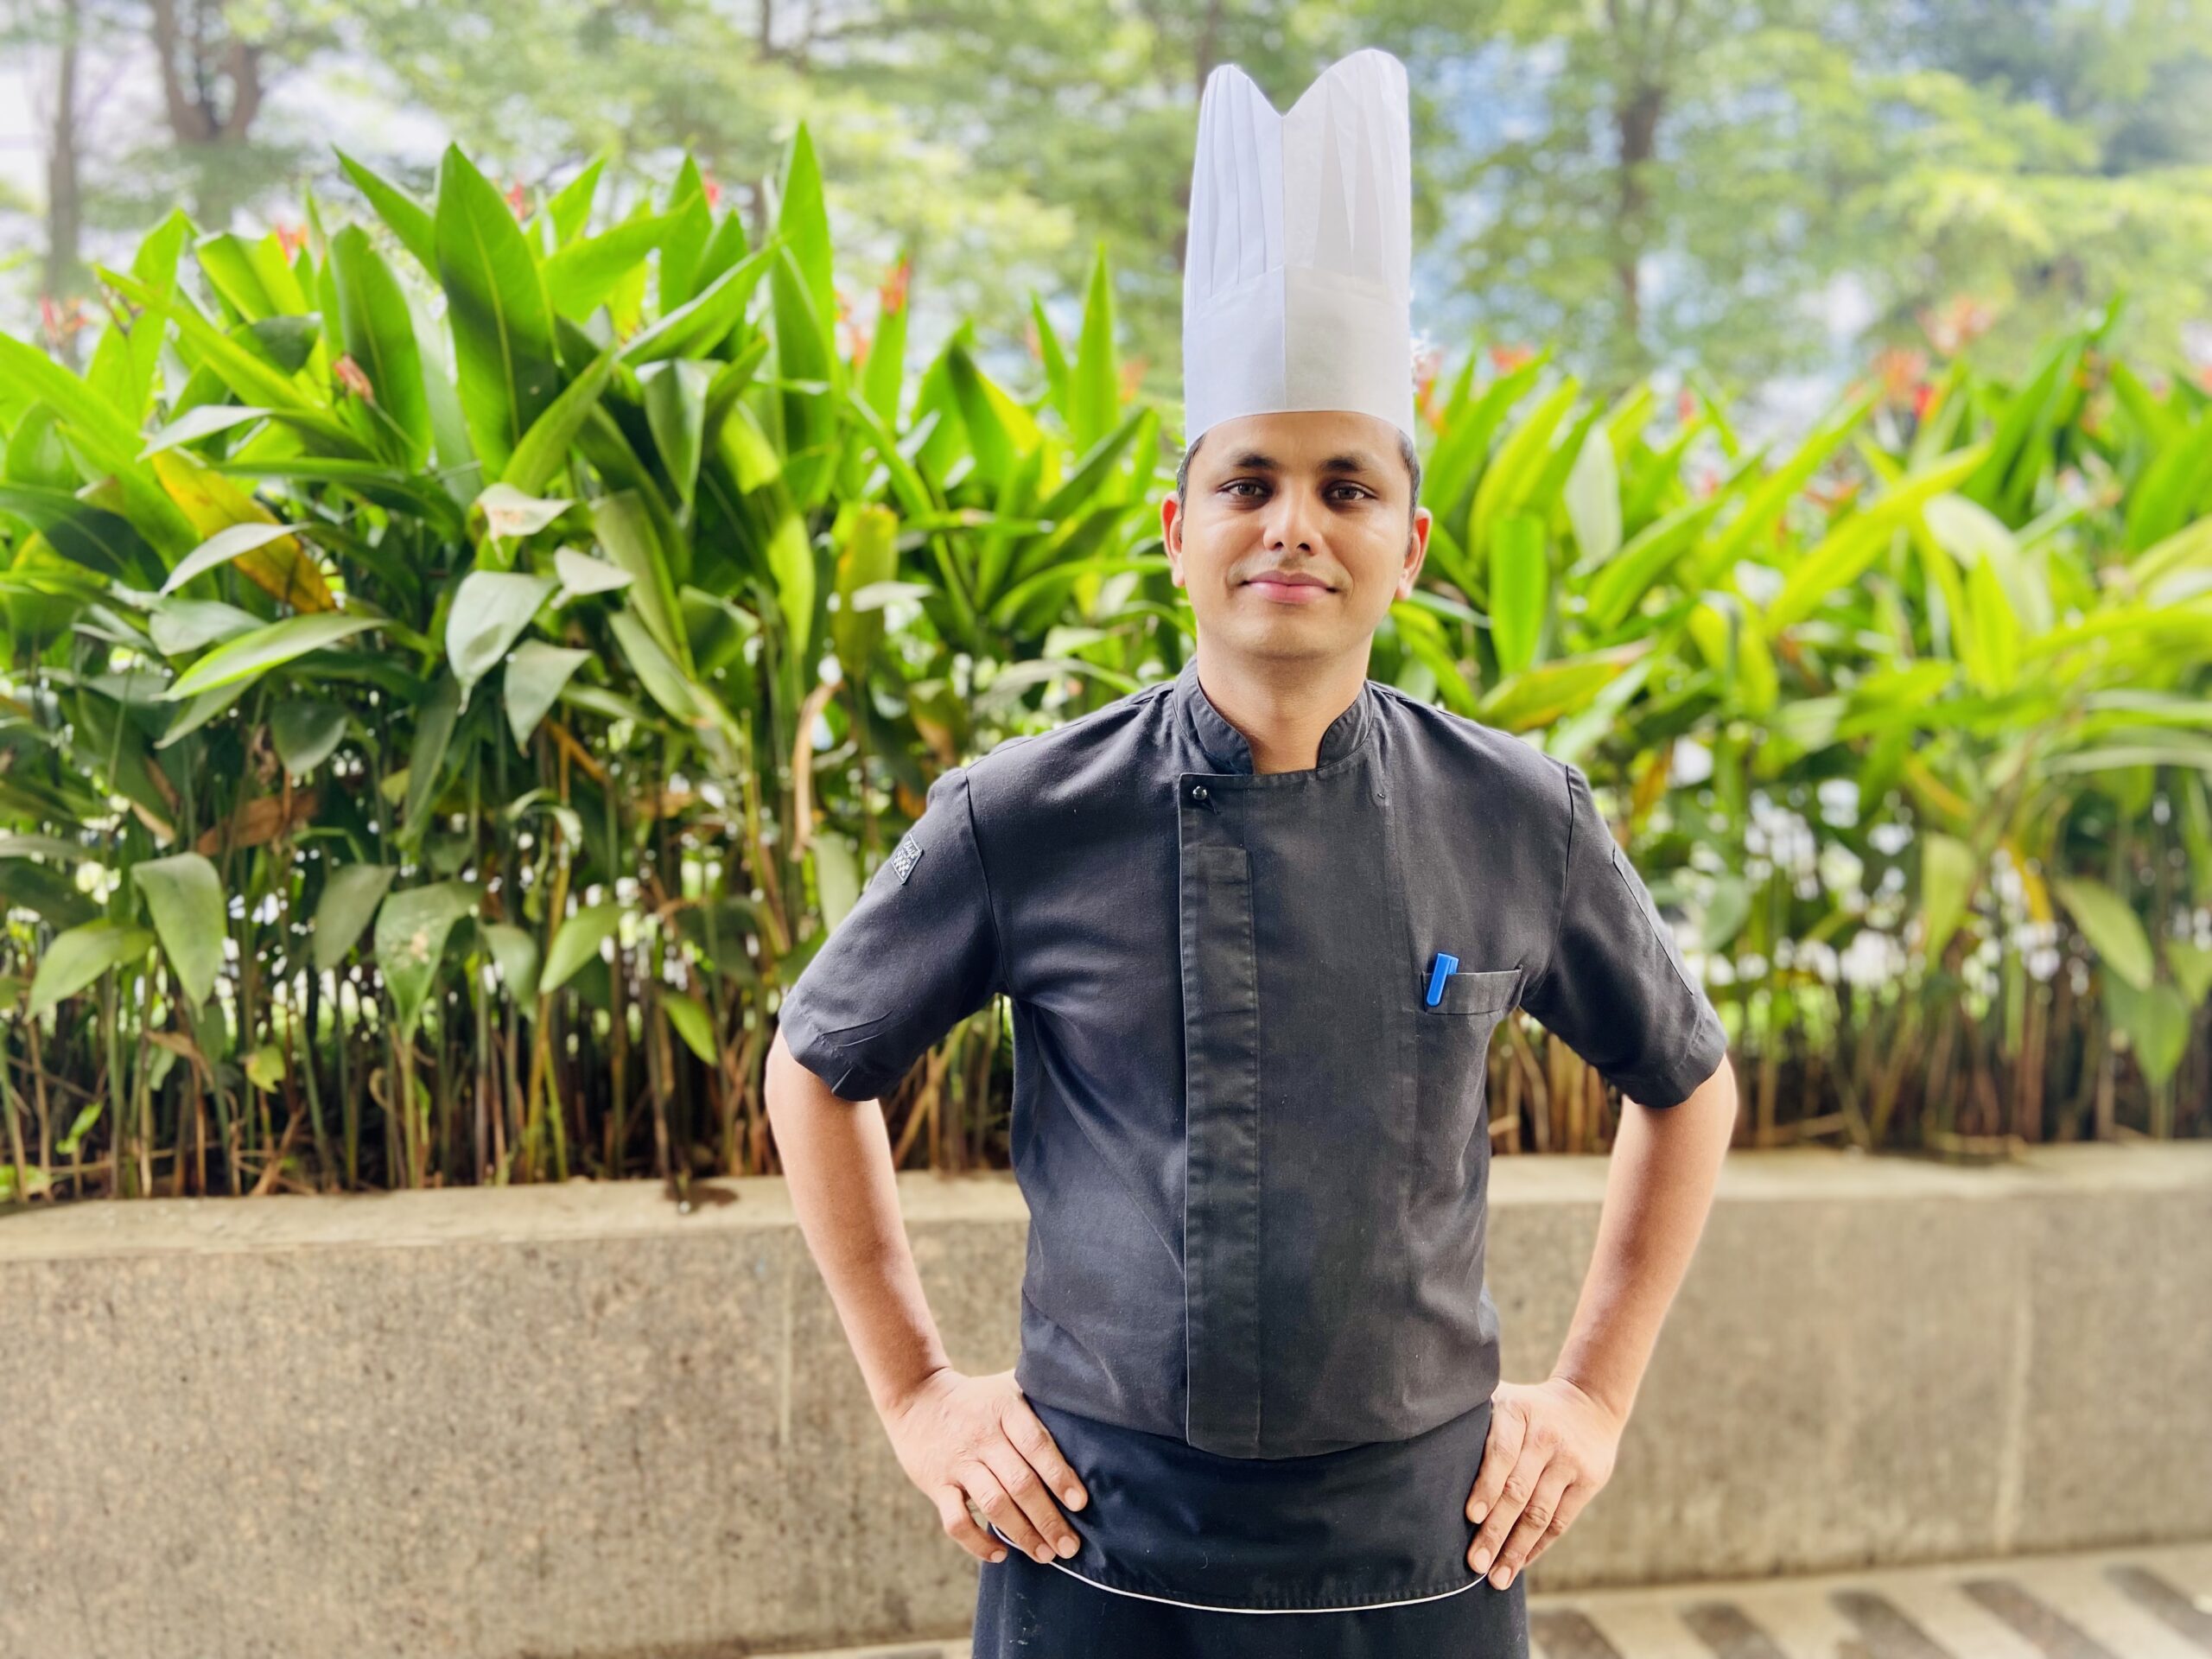 Courtyard by Marriott Pune Chakan appoints Chef Vikram N. Patil as Junior Sous Chef